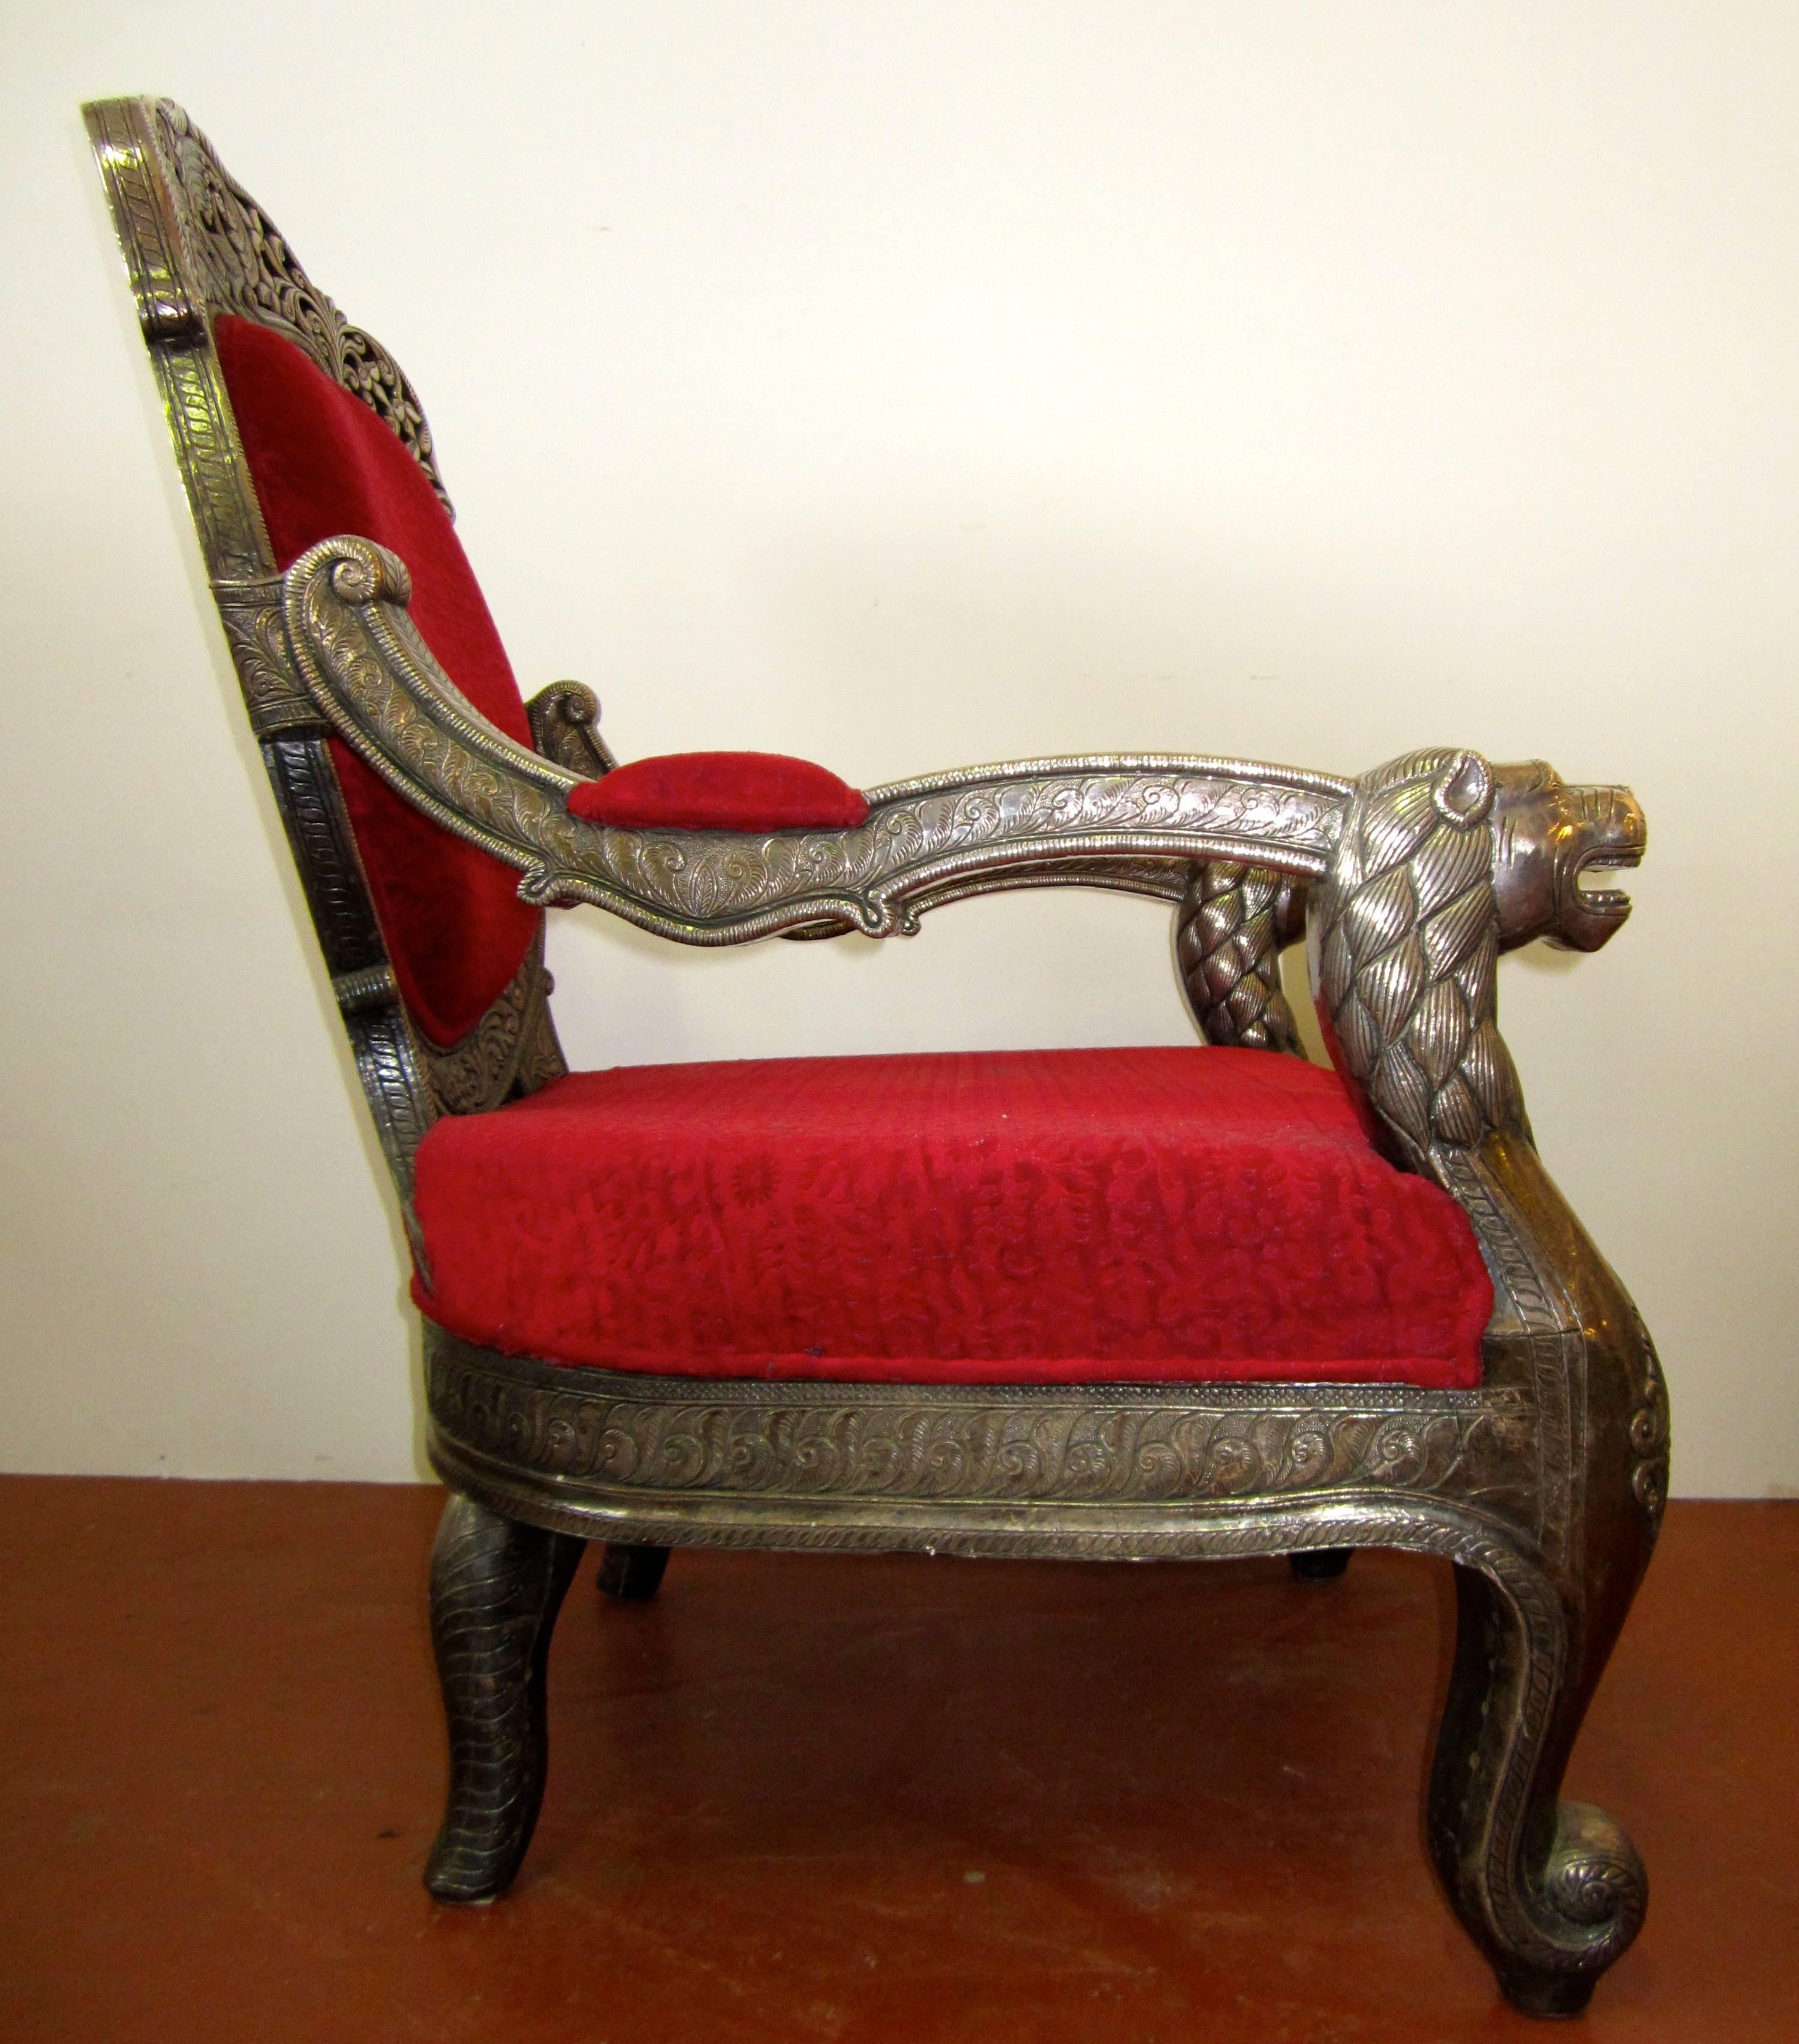 Indian carved wood and silver covered armchair with lion heads, peacock and leaves motive. India 1950 circa.